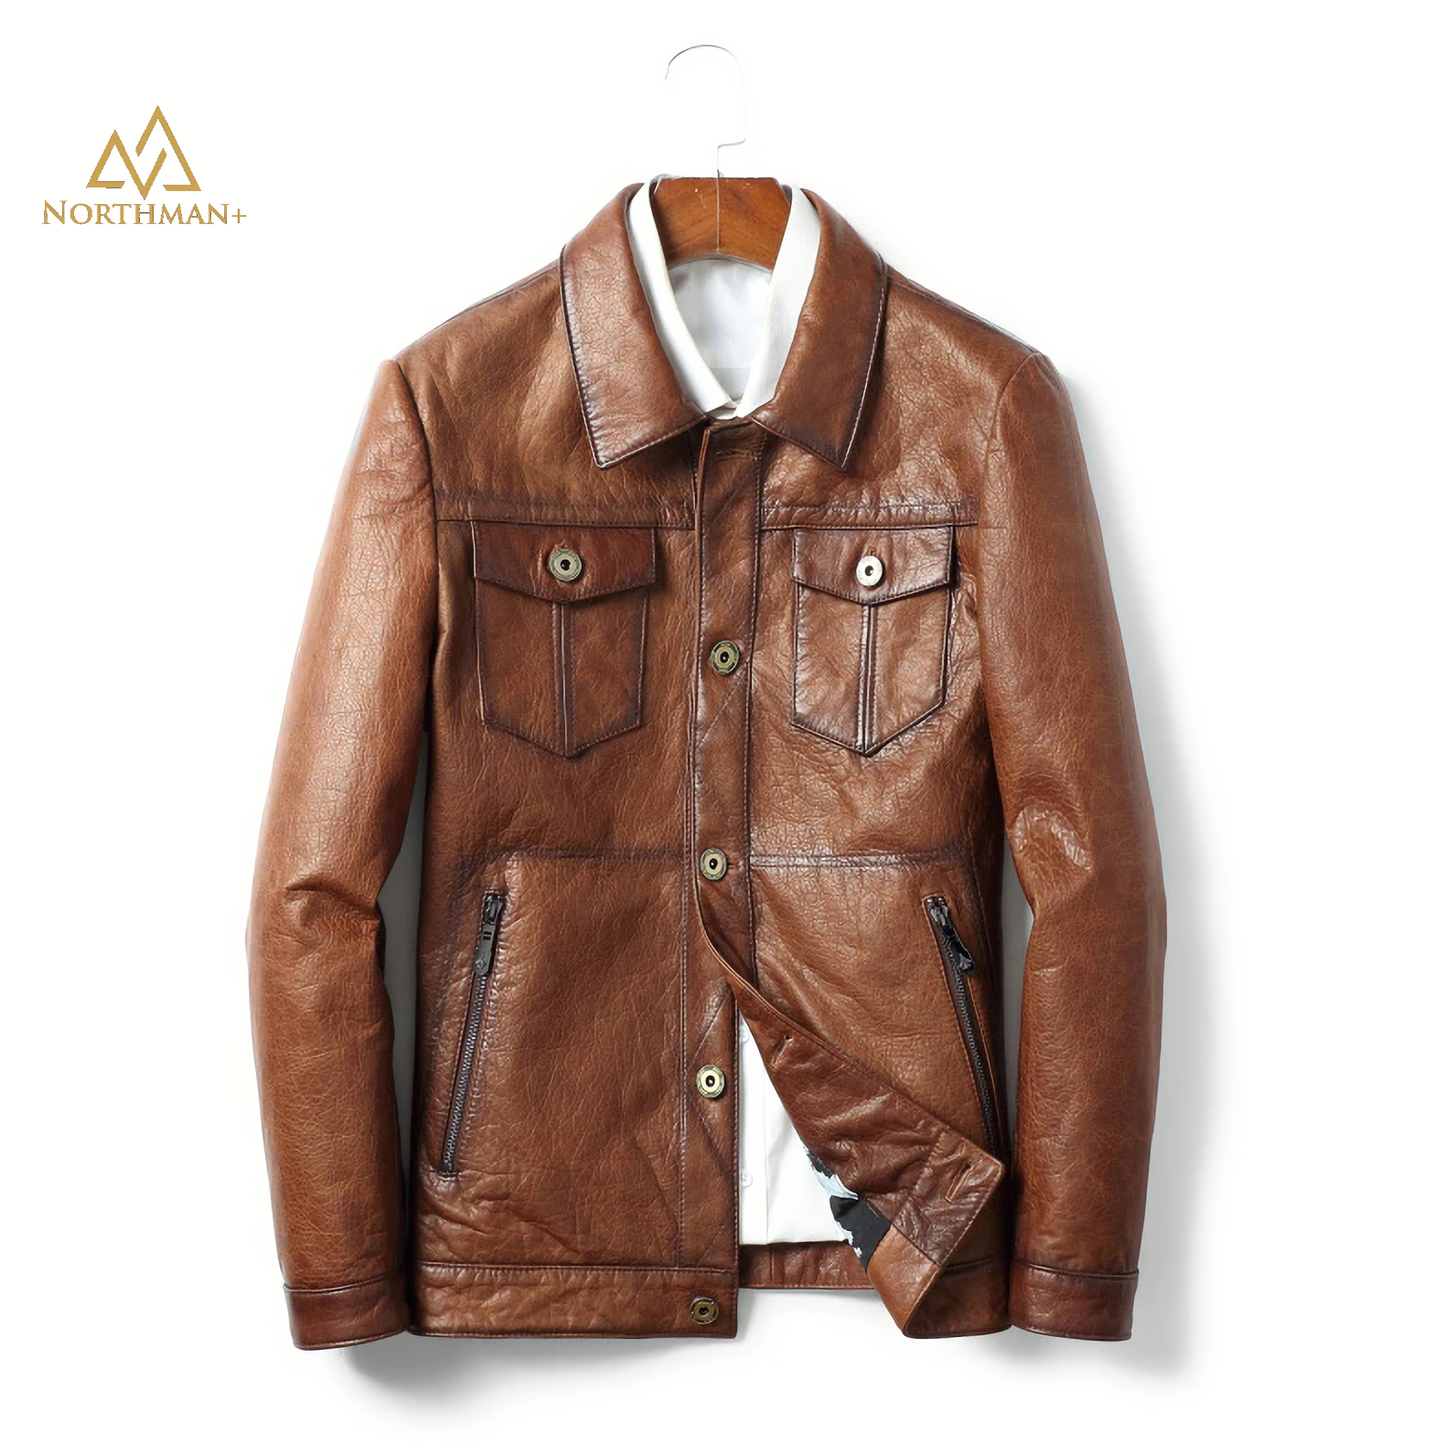 Seargent Field Leather Jacket in Brown